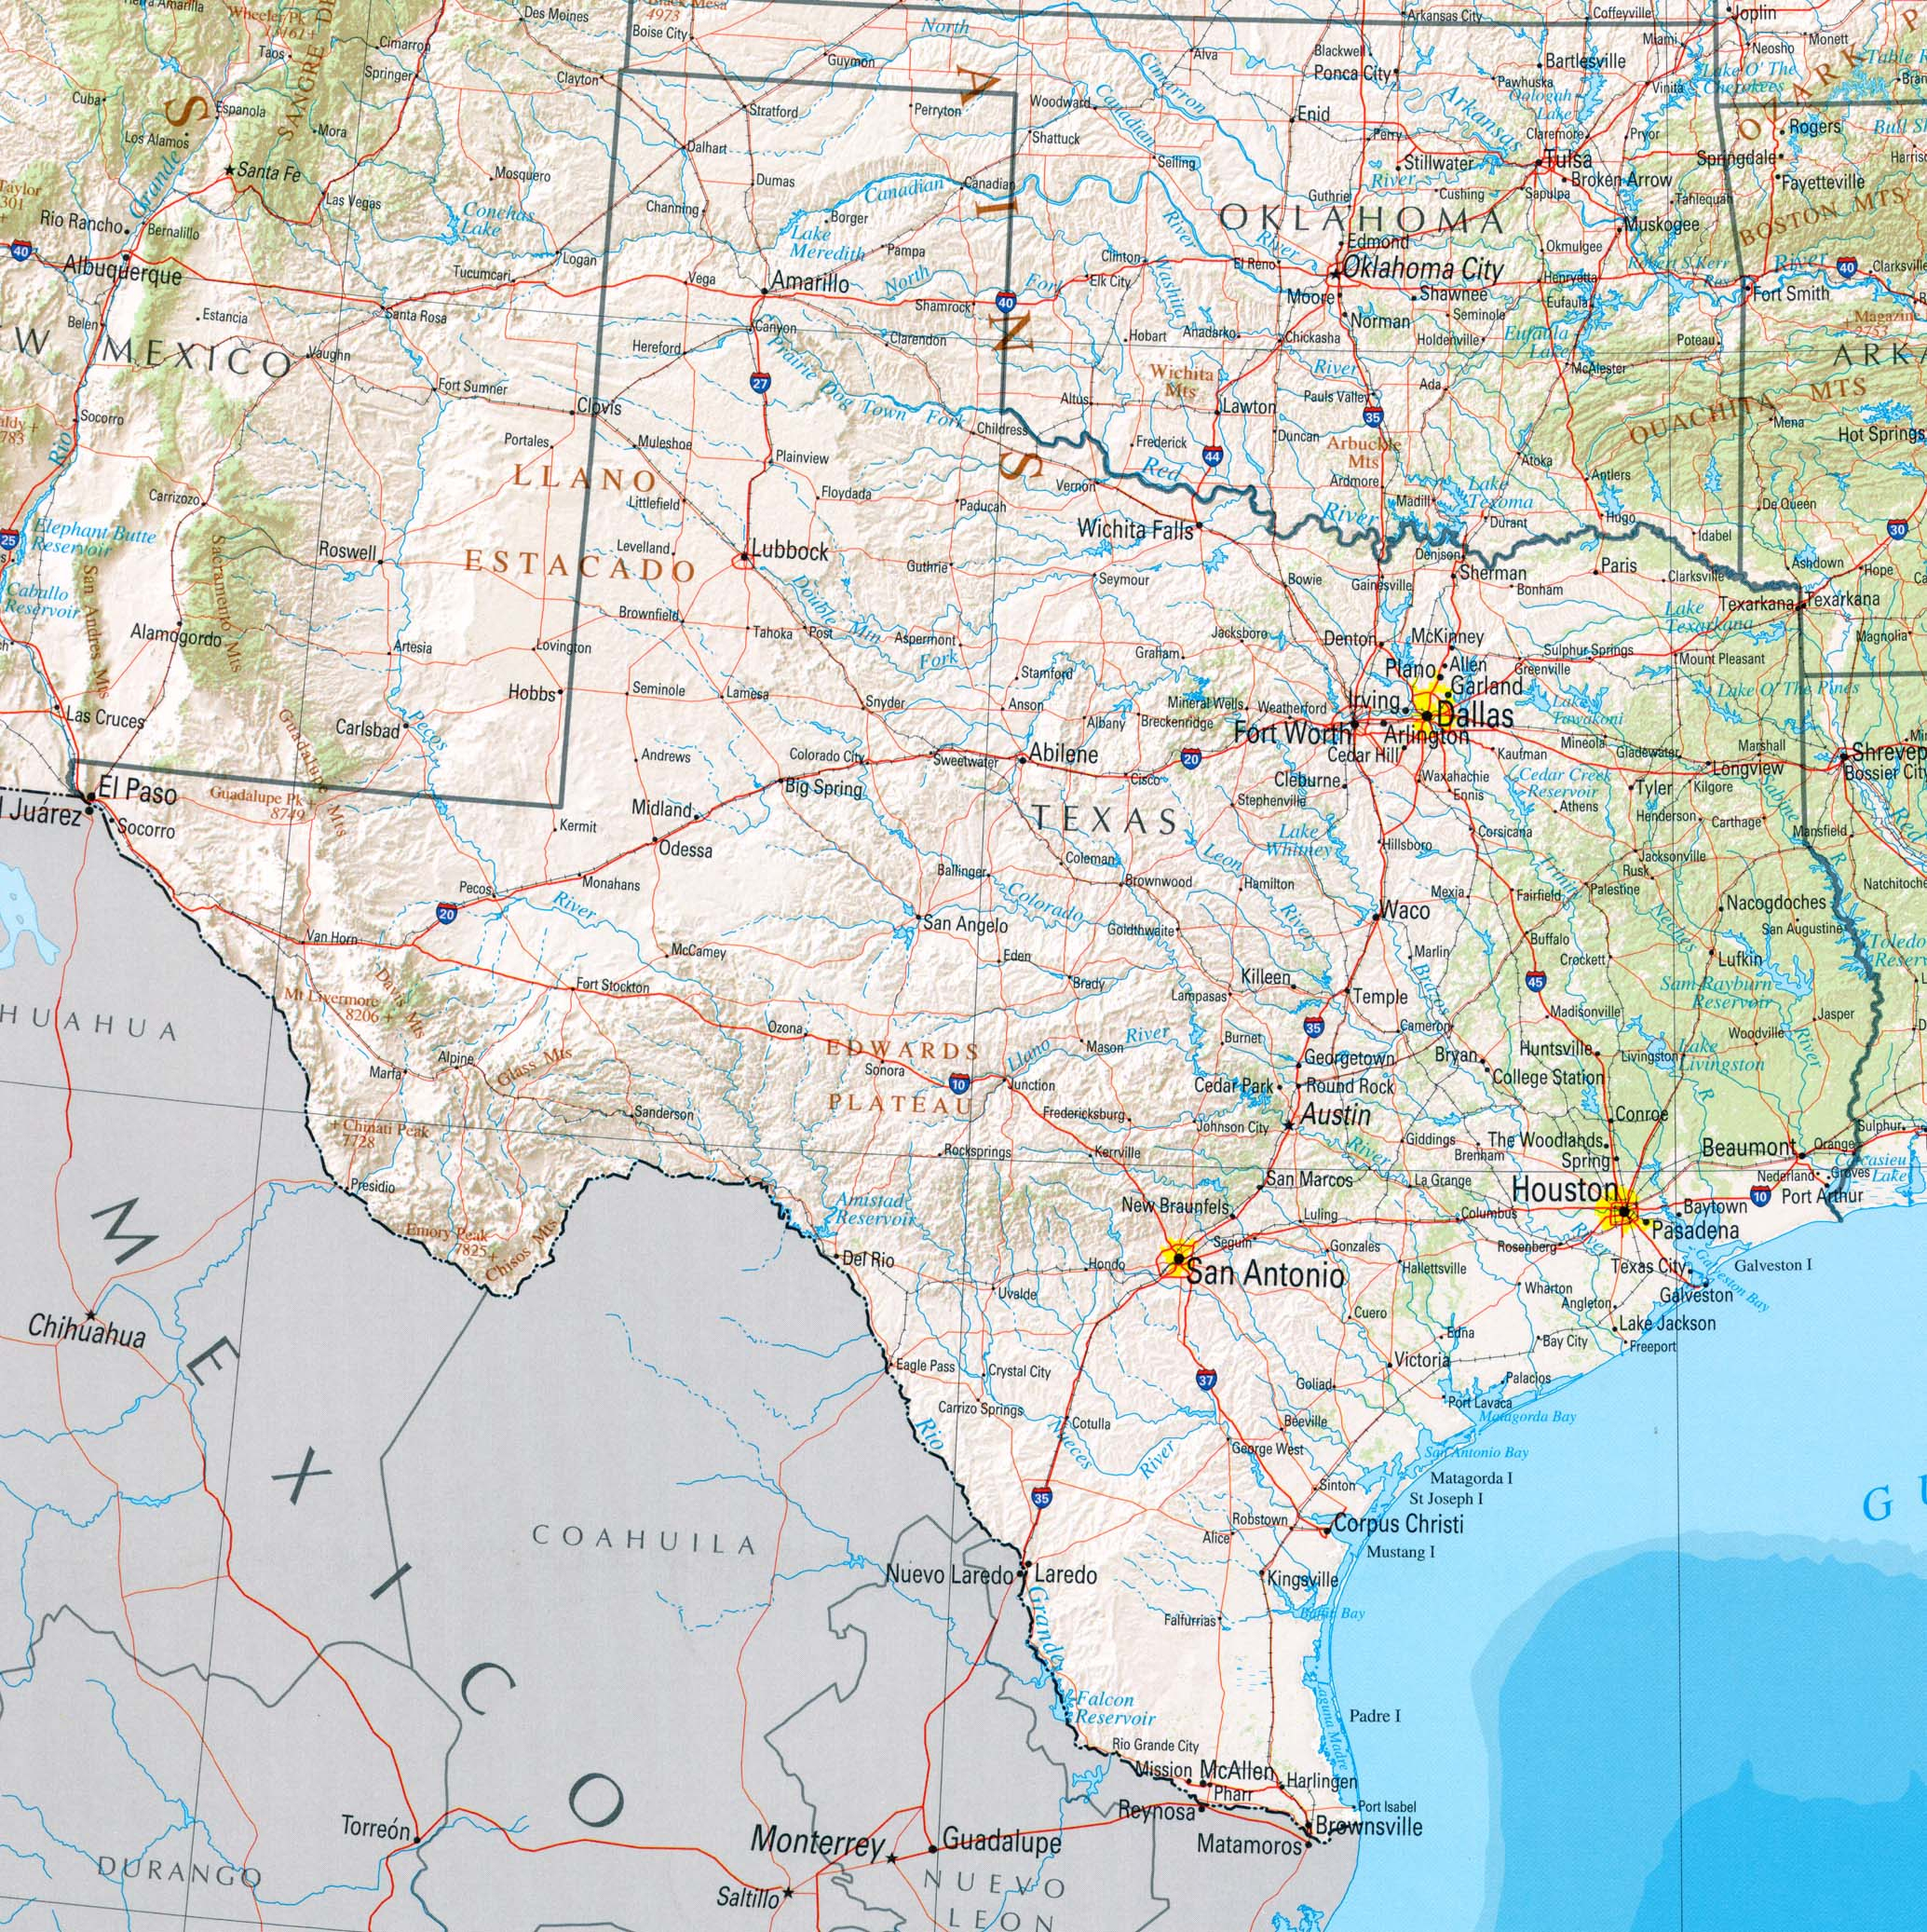 Statemaster - Statistics On Texas. Facts And Figures, Stats And - Texas New Mexico Map